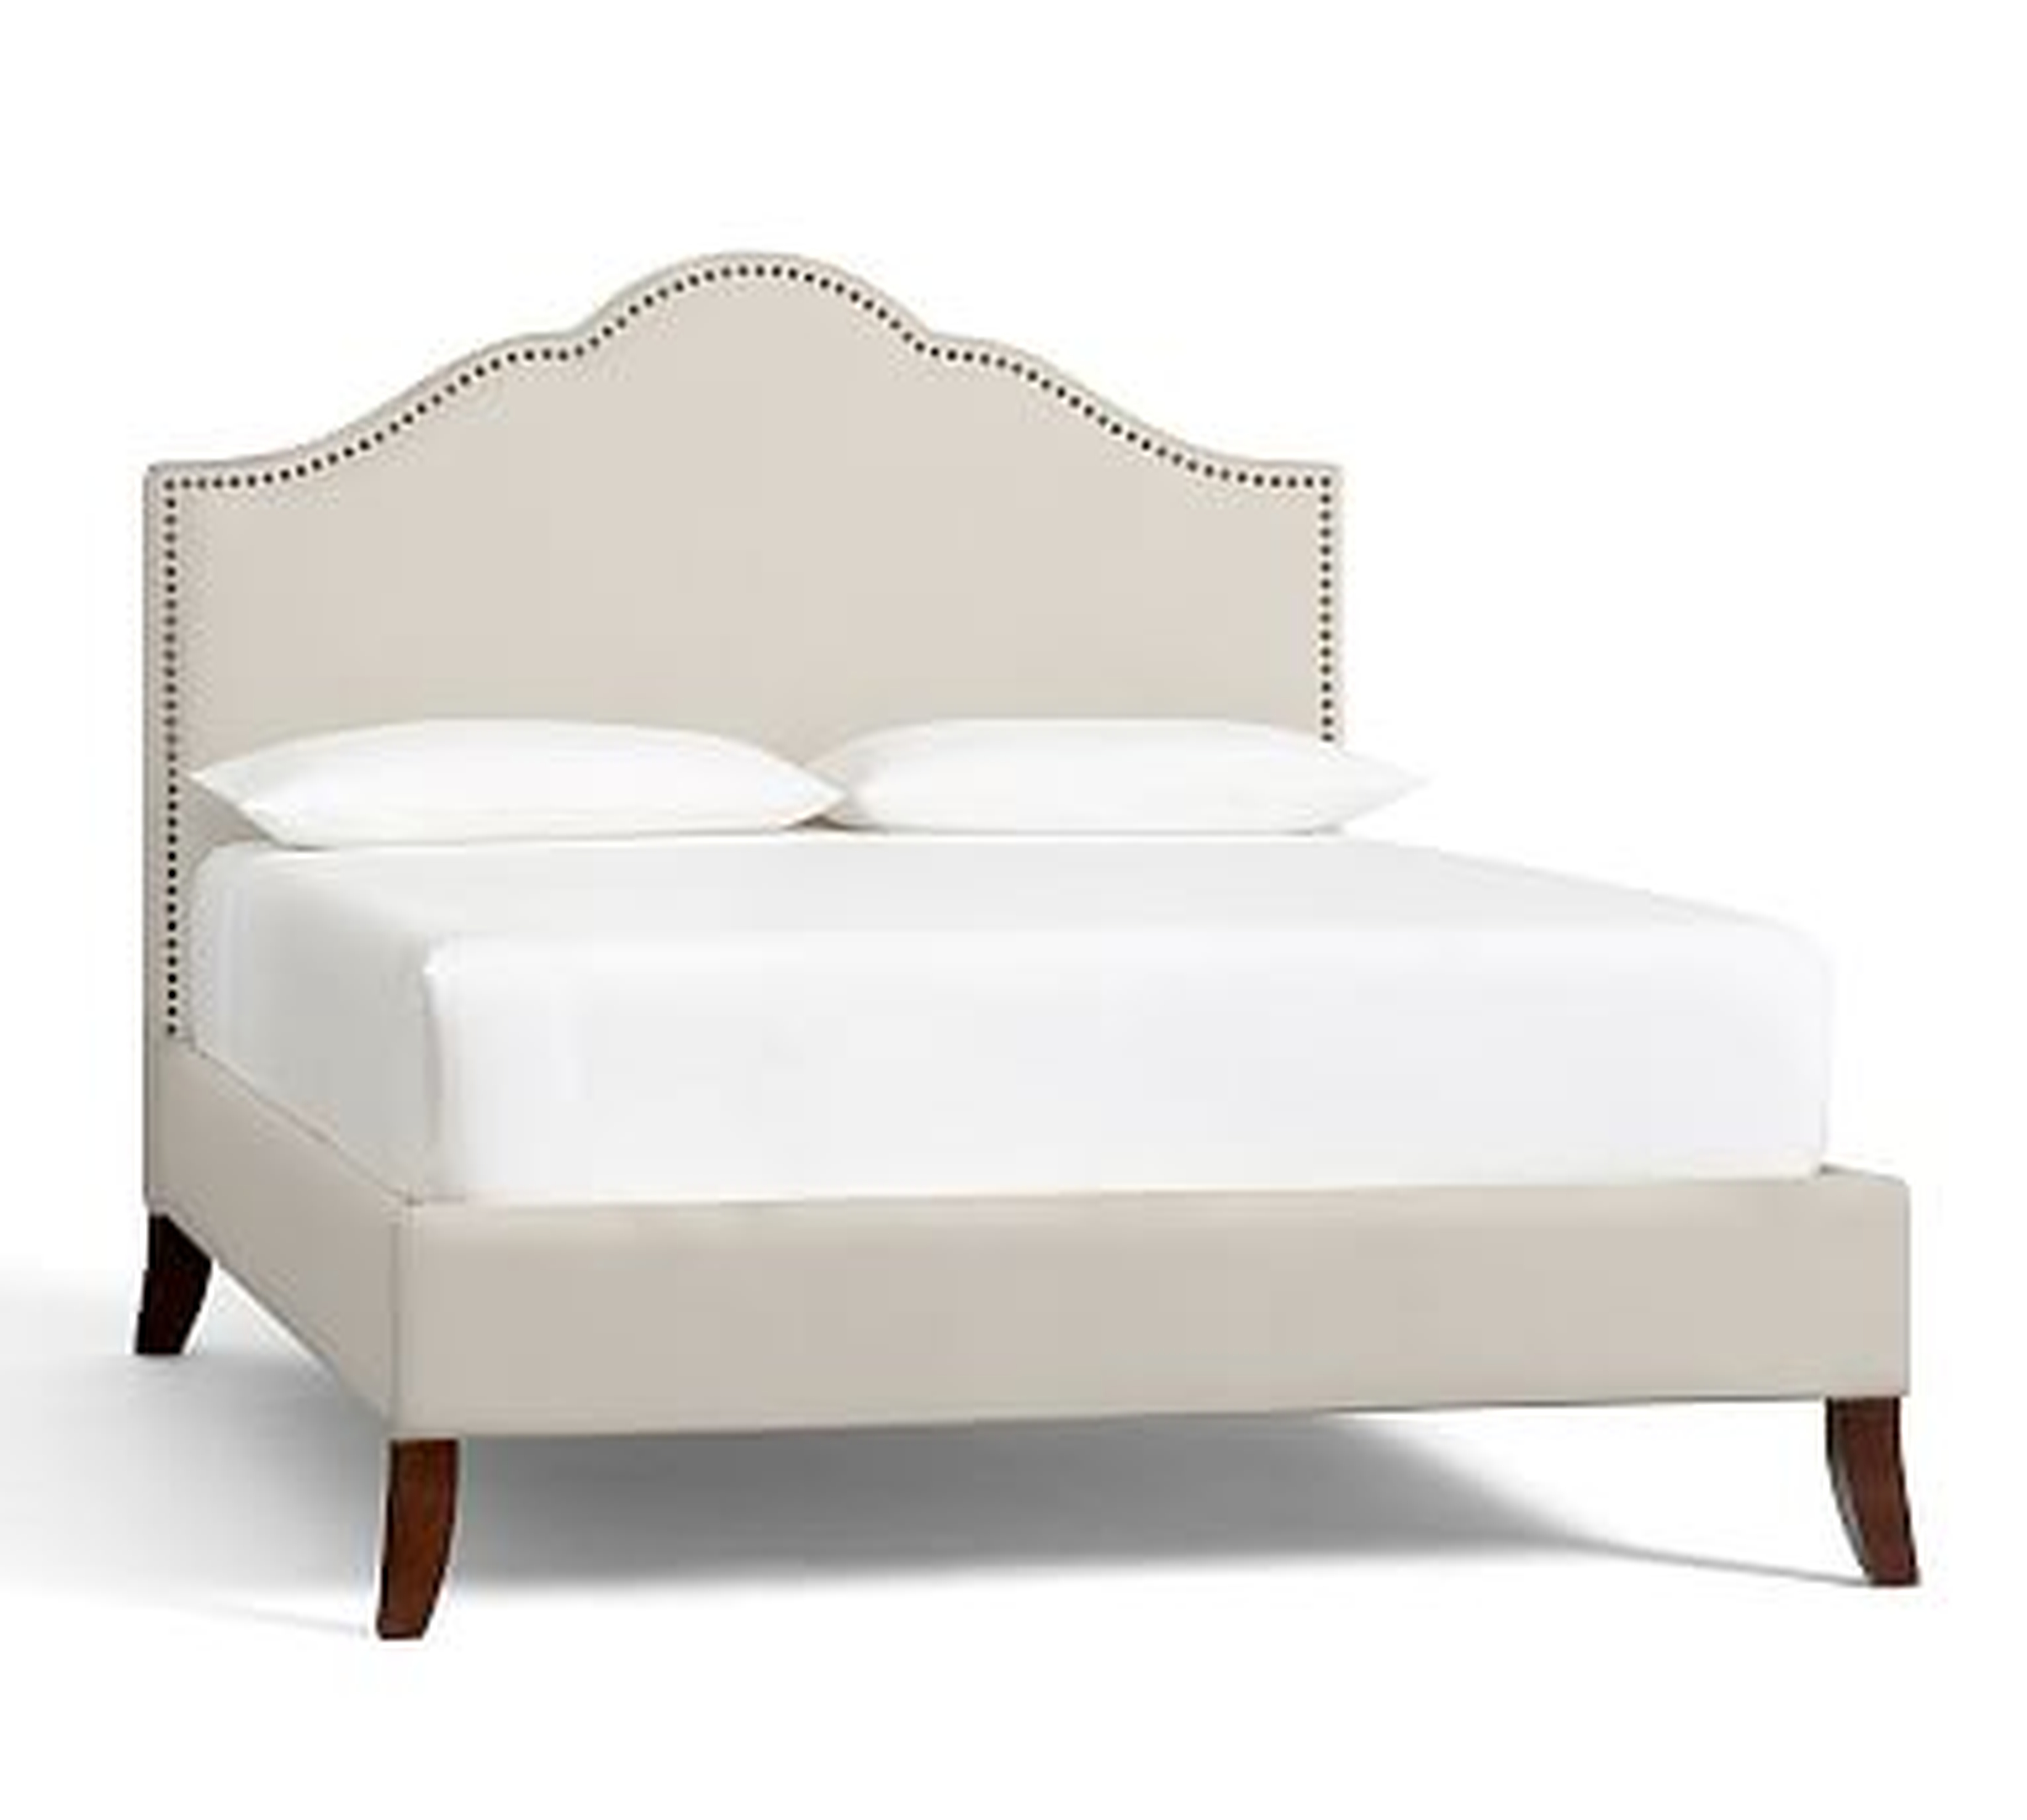 Fallon Upholstered Bed with Bronze Nailheads, King, Twill Cream - Pottery Barn